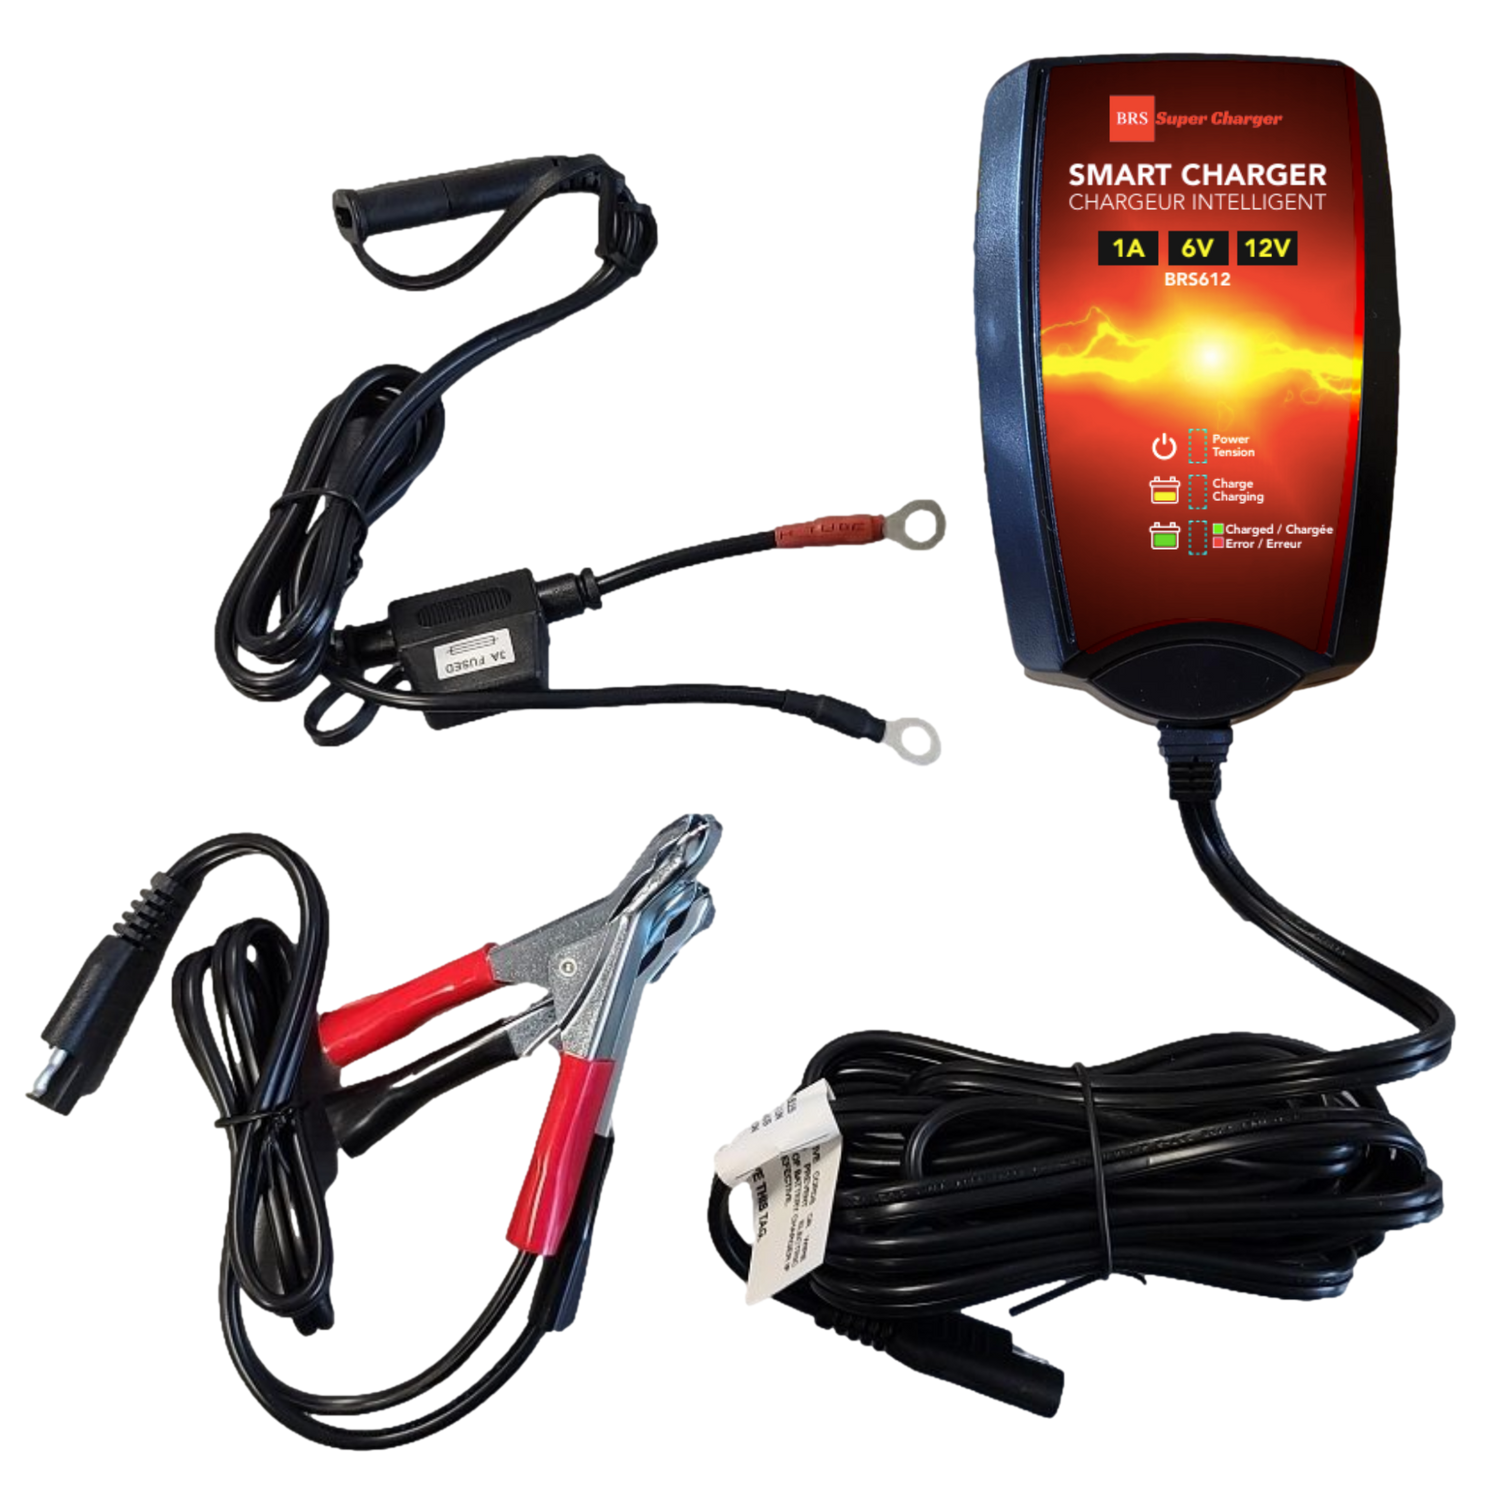 High Performance BRS20-BS 2 Year Battery & Smart Charger / Maintainer Combo Bundle Kit  12v Sealed AGM PowerSports Battery - BRS Super Battery